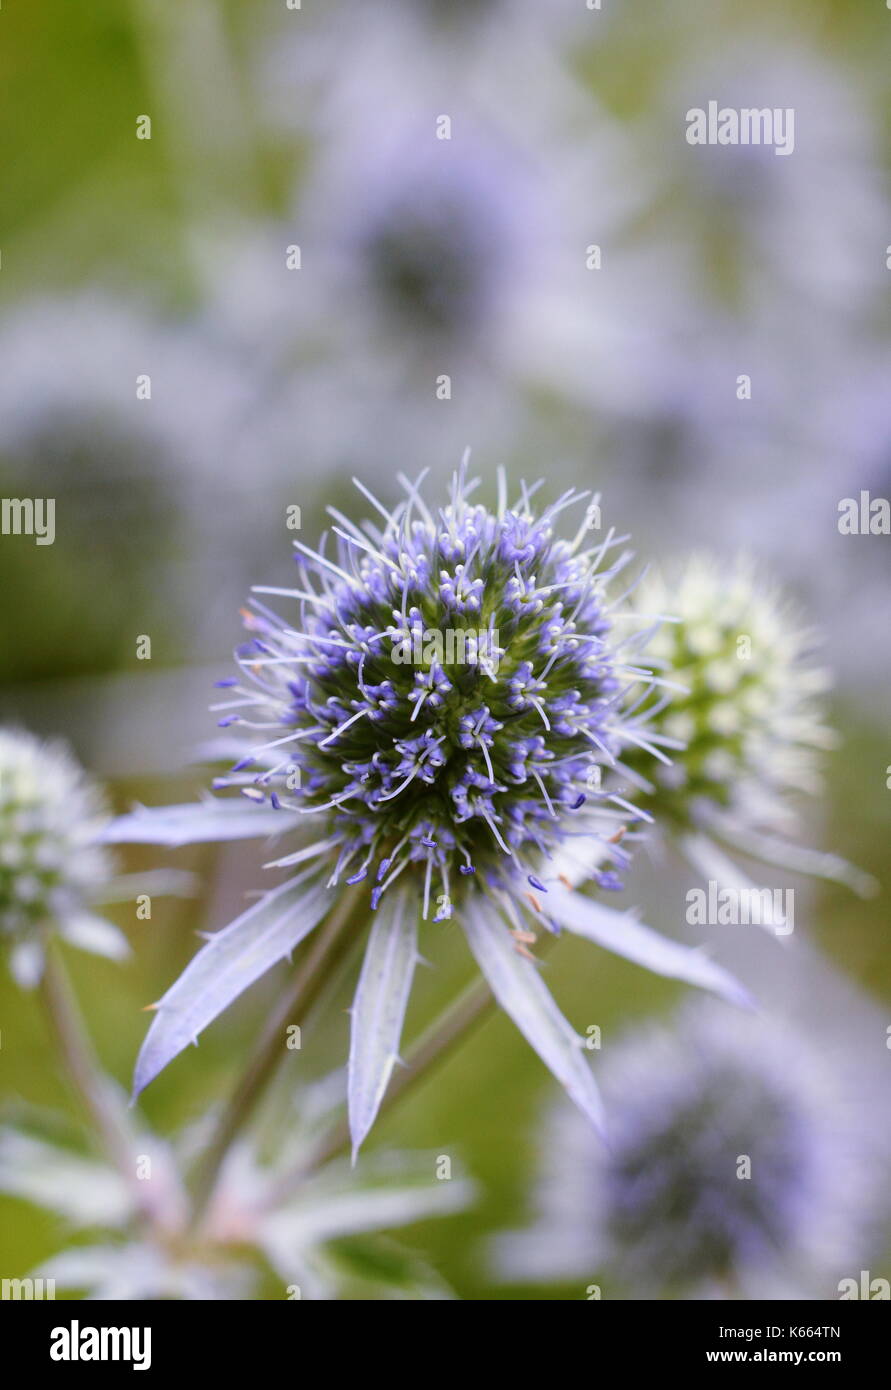 Eryngium Planum sea holly, also called Blue Eryngo, a robust perennial with blue spiny flowers, blooming an an English summer garden border, UK Stock Photo